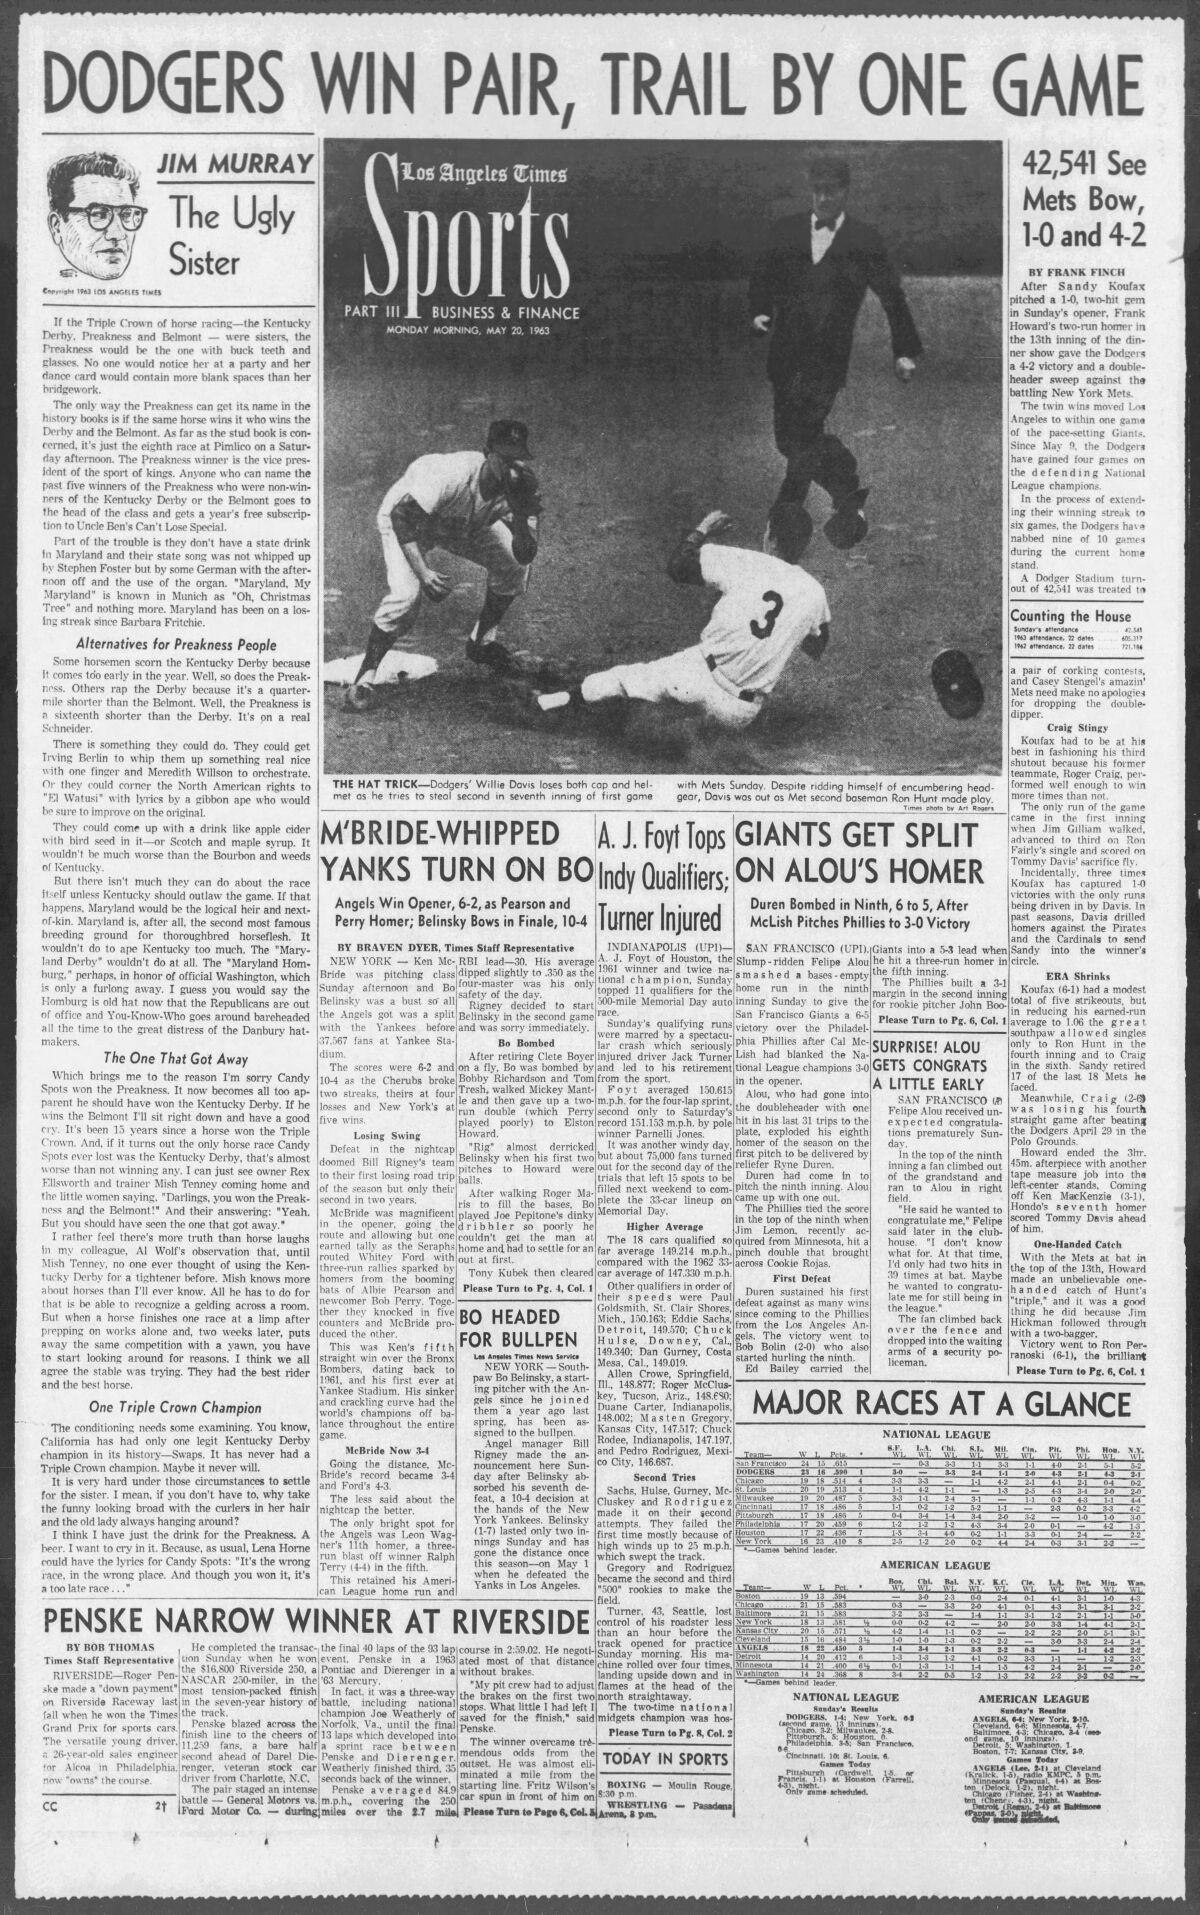 Front page of the Los Angeles Times Sports section of May 20, 1963.